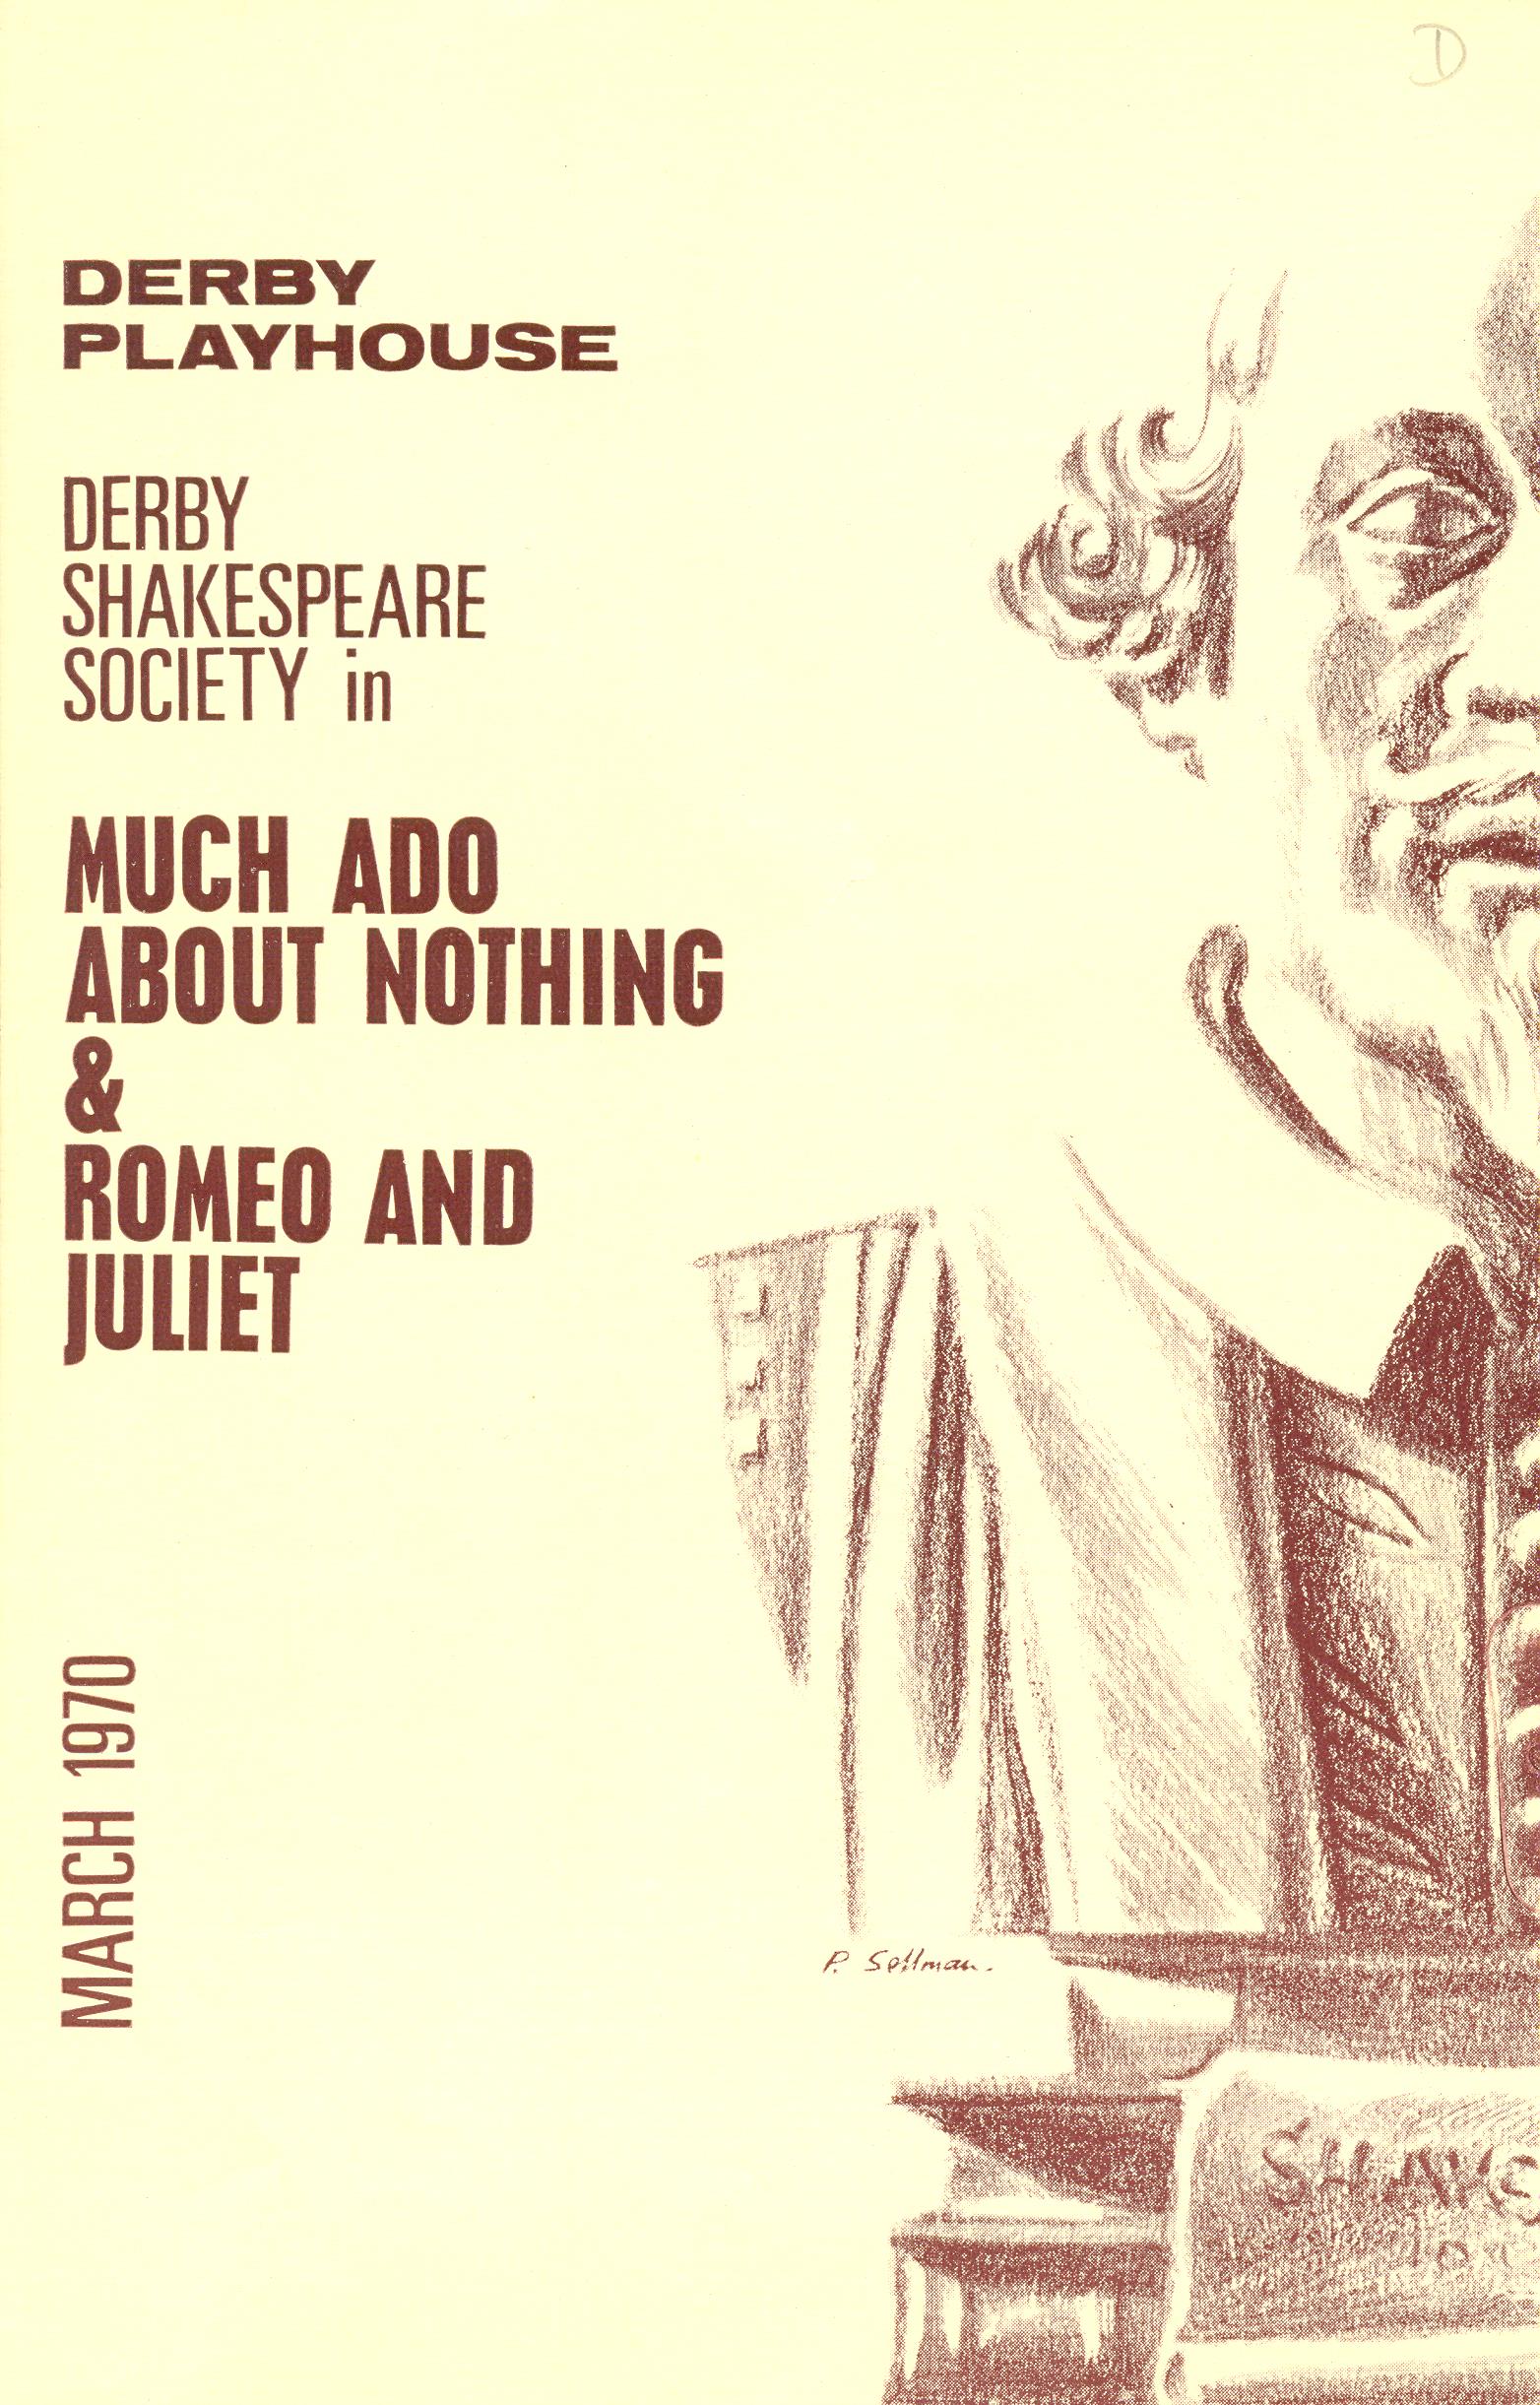 'Much Ado About Nothing' & 'Romeo & Juliet' 1970